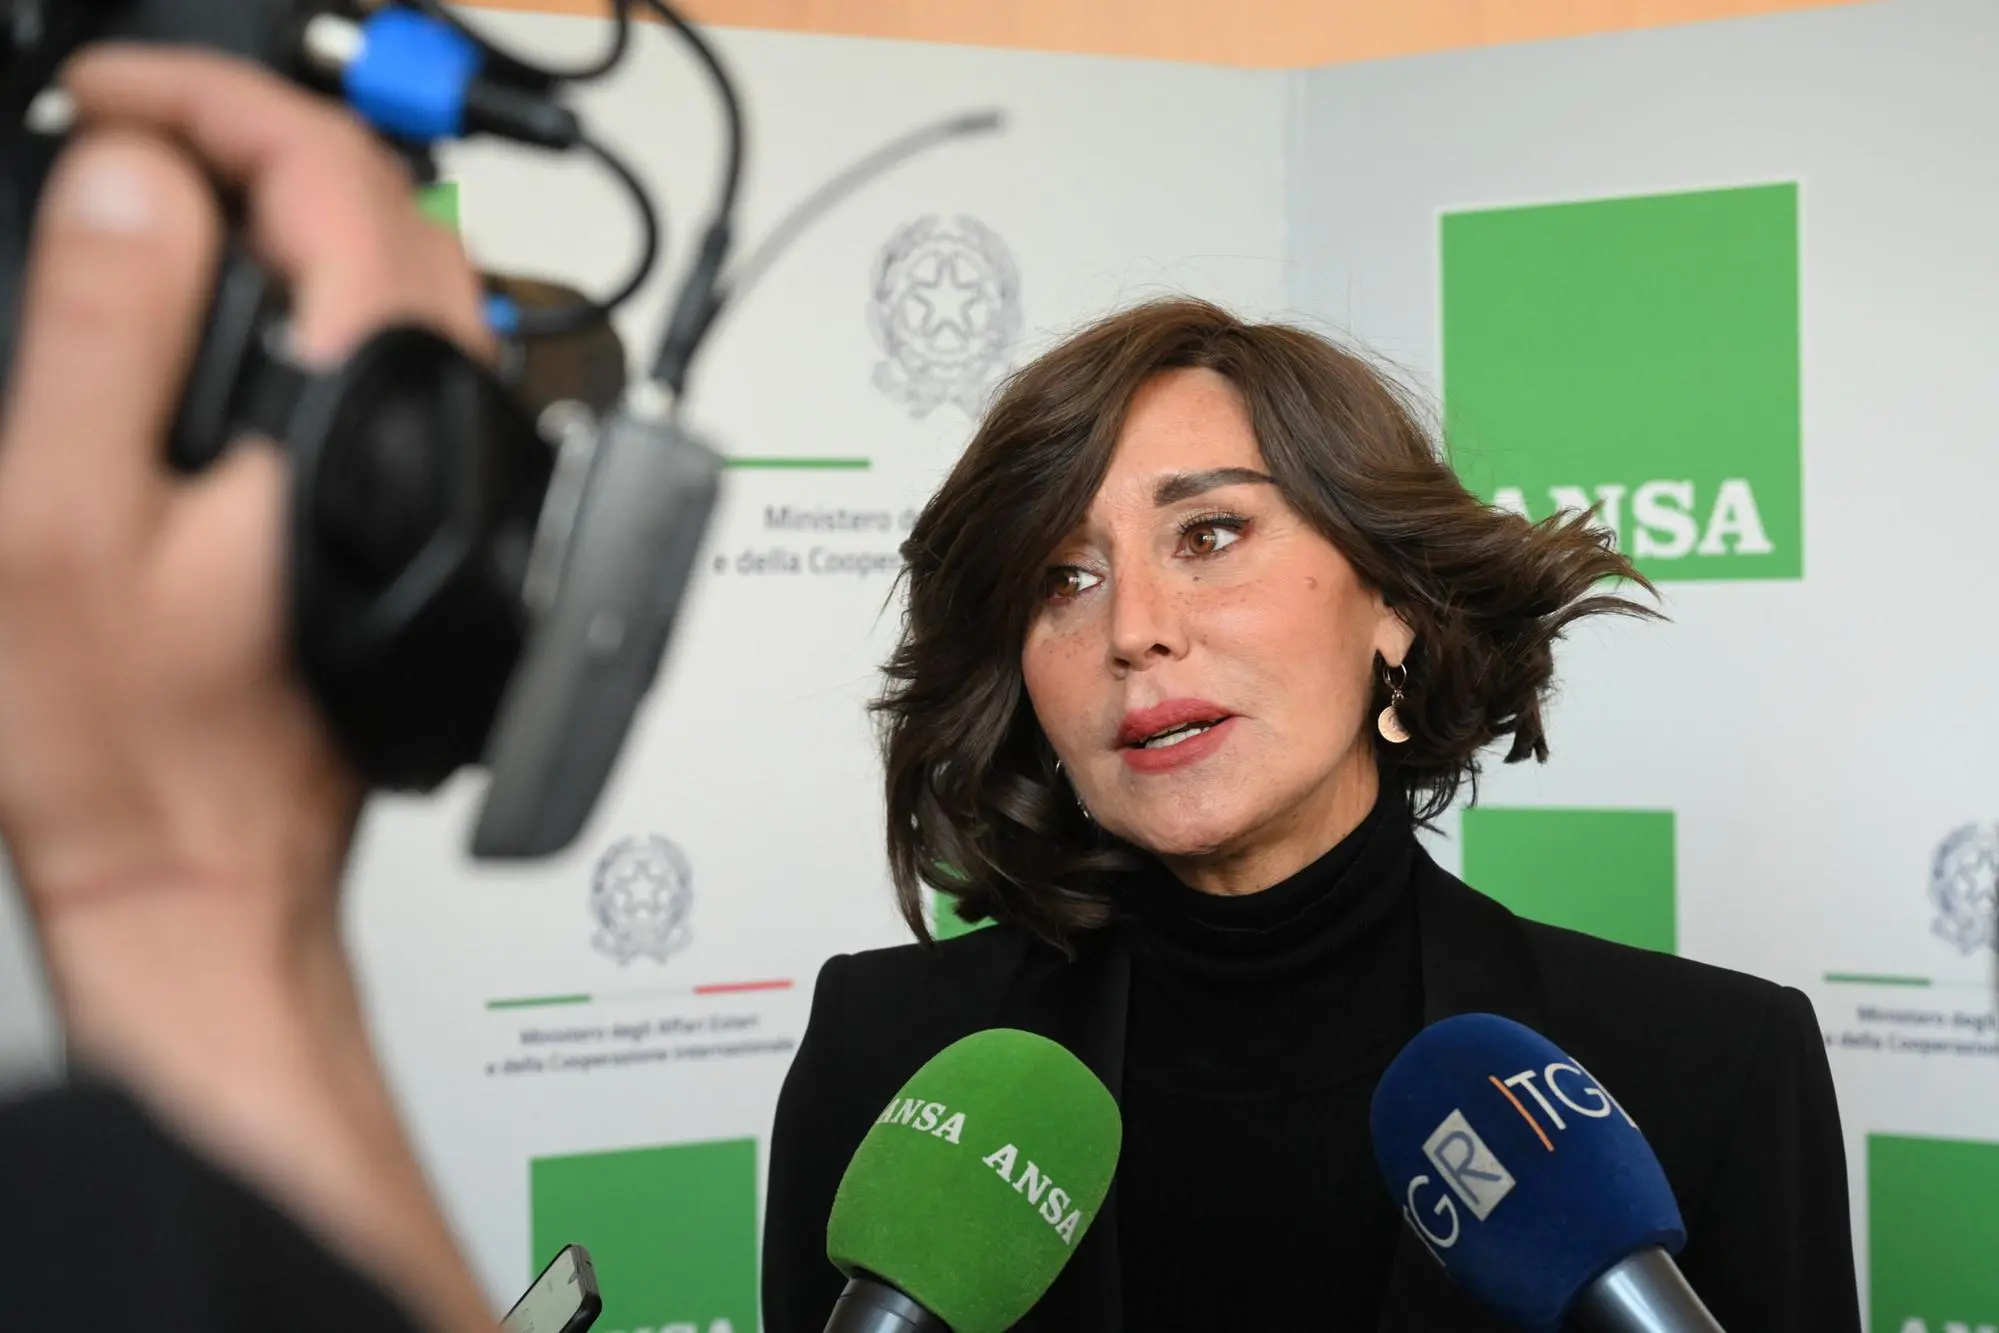 Italy's Minister of University, Anna Maria Bernini, attends the Conference "Scientific and Space Attaches Scientific. Diplomacy at the Service of Italy's Growth". Padua, 7 March 2023. ANSA/CLAUDIO PERI